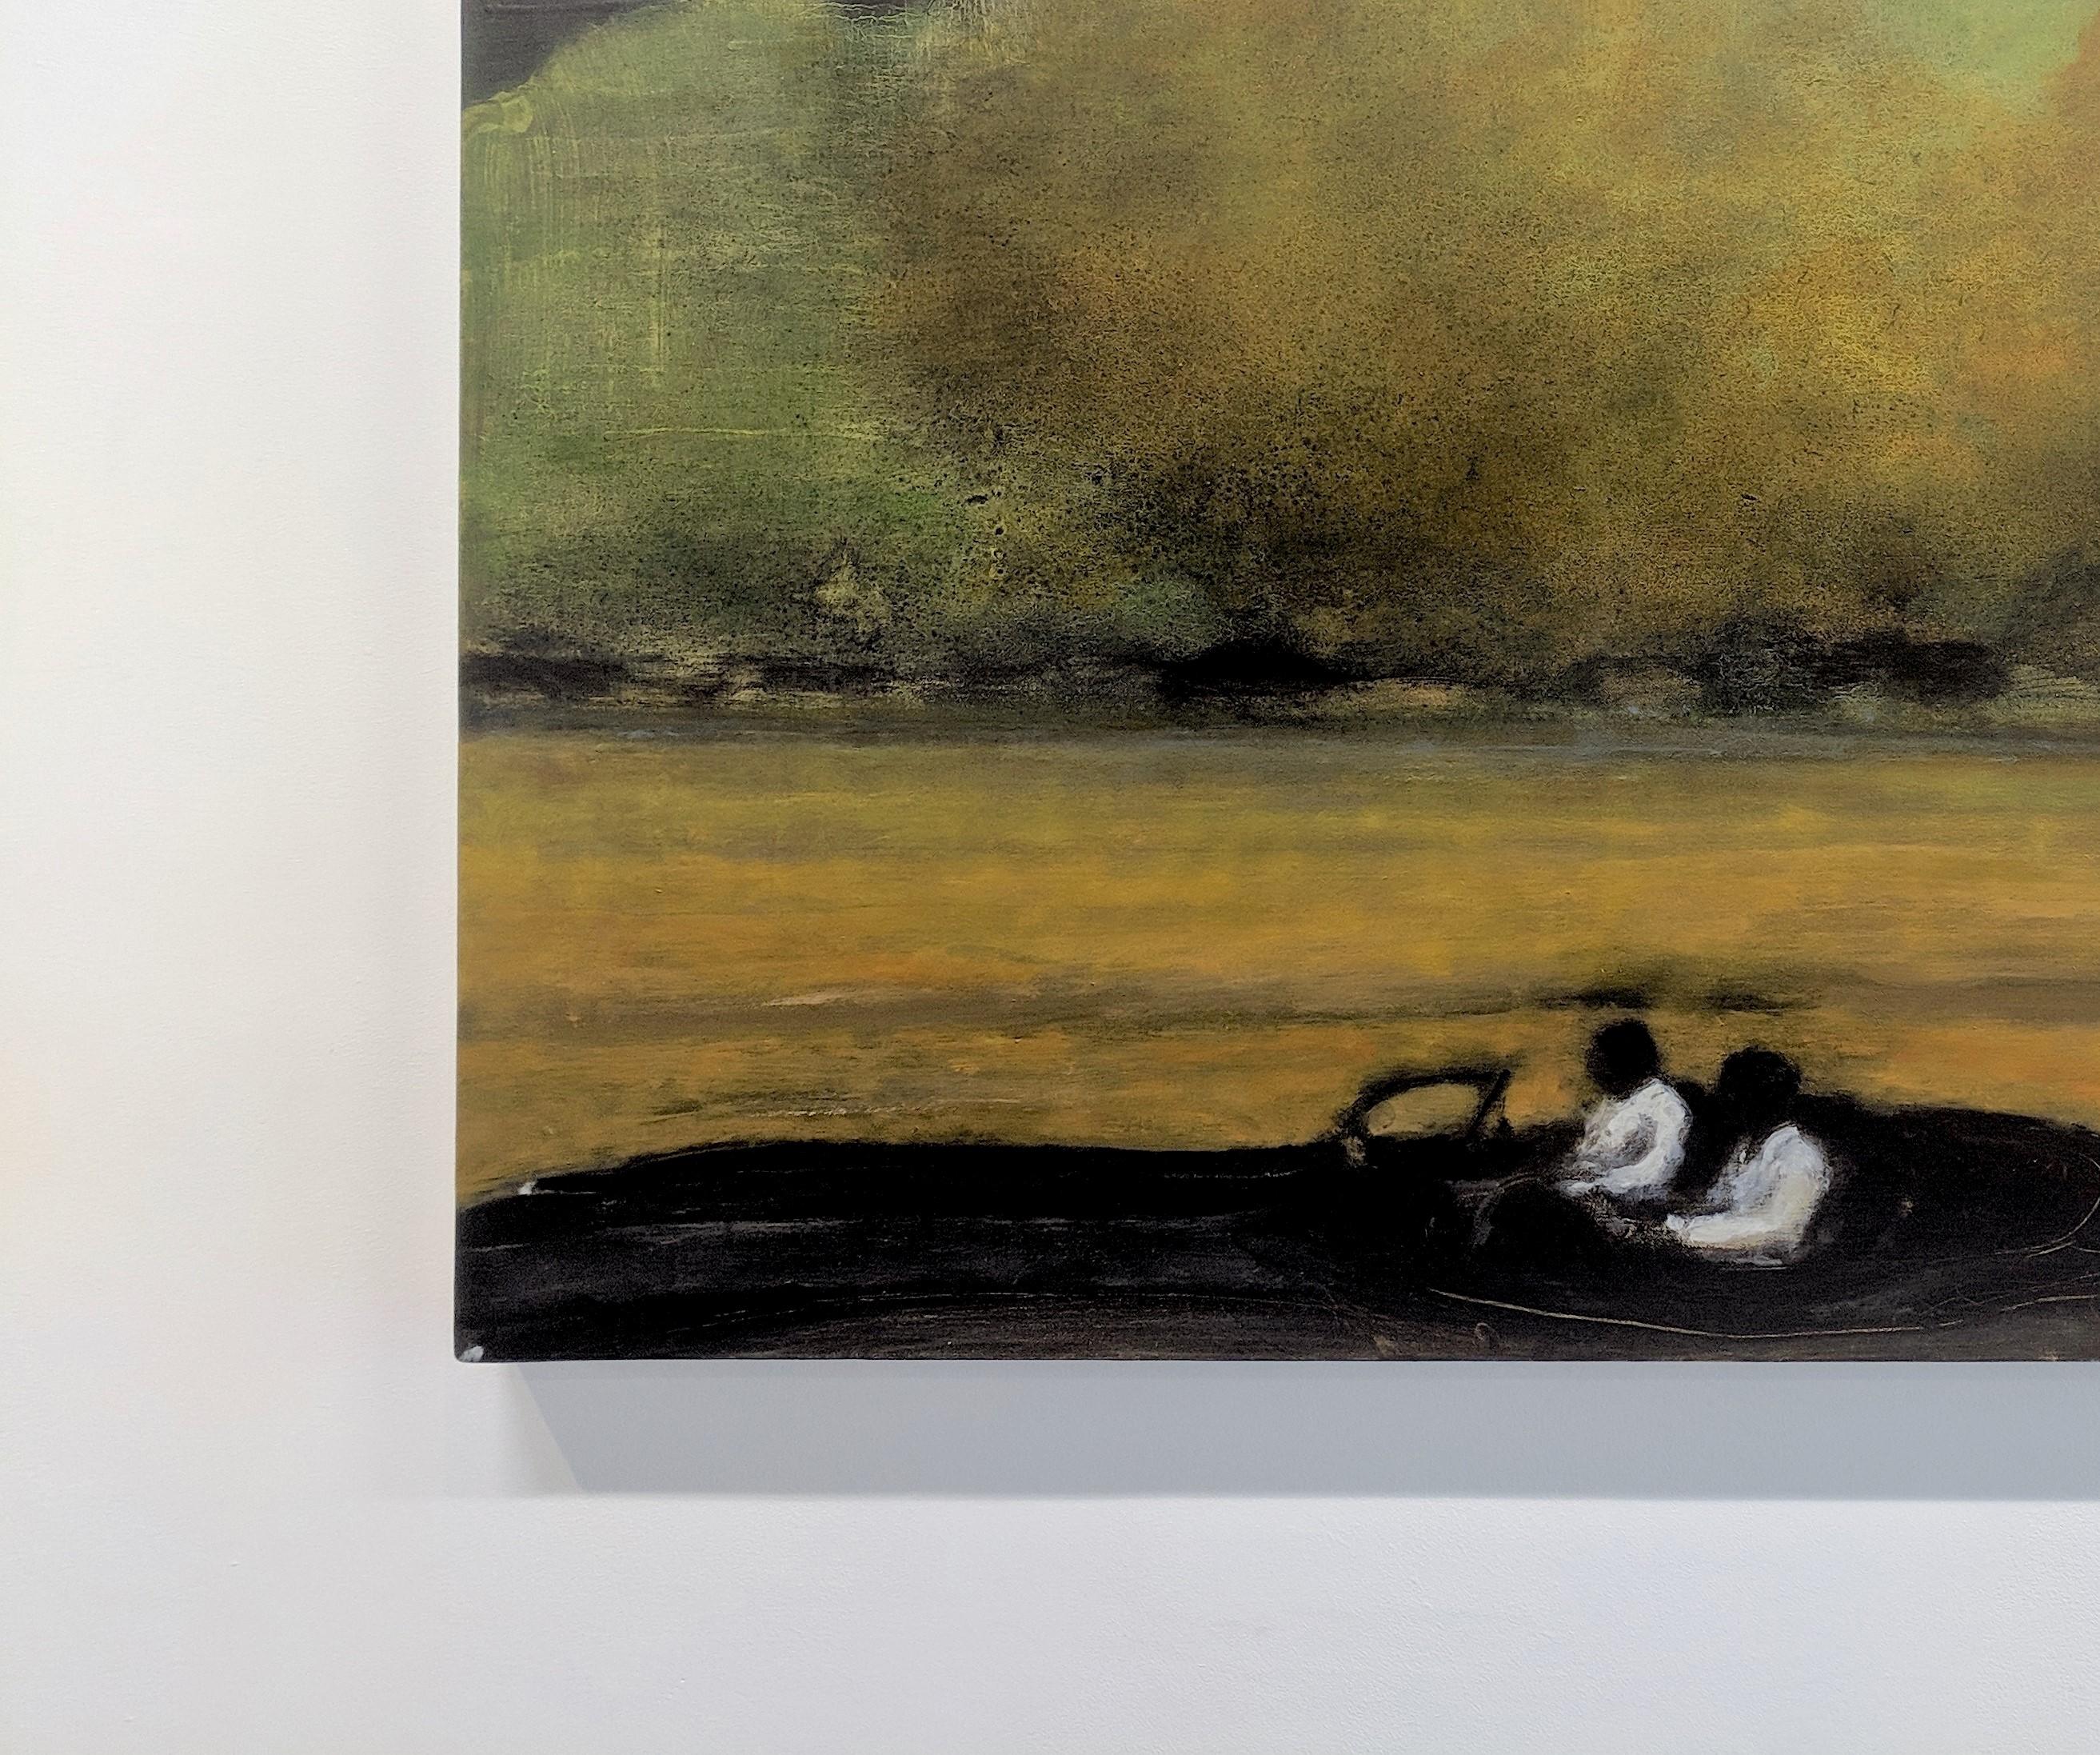 Wide Field, Landscape Painting of Two Figures in Car, Gold, Brown, Green Trees 2